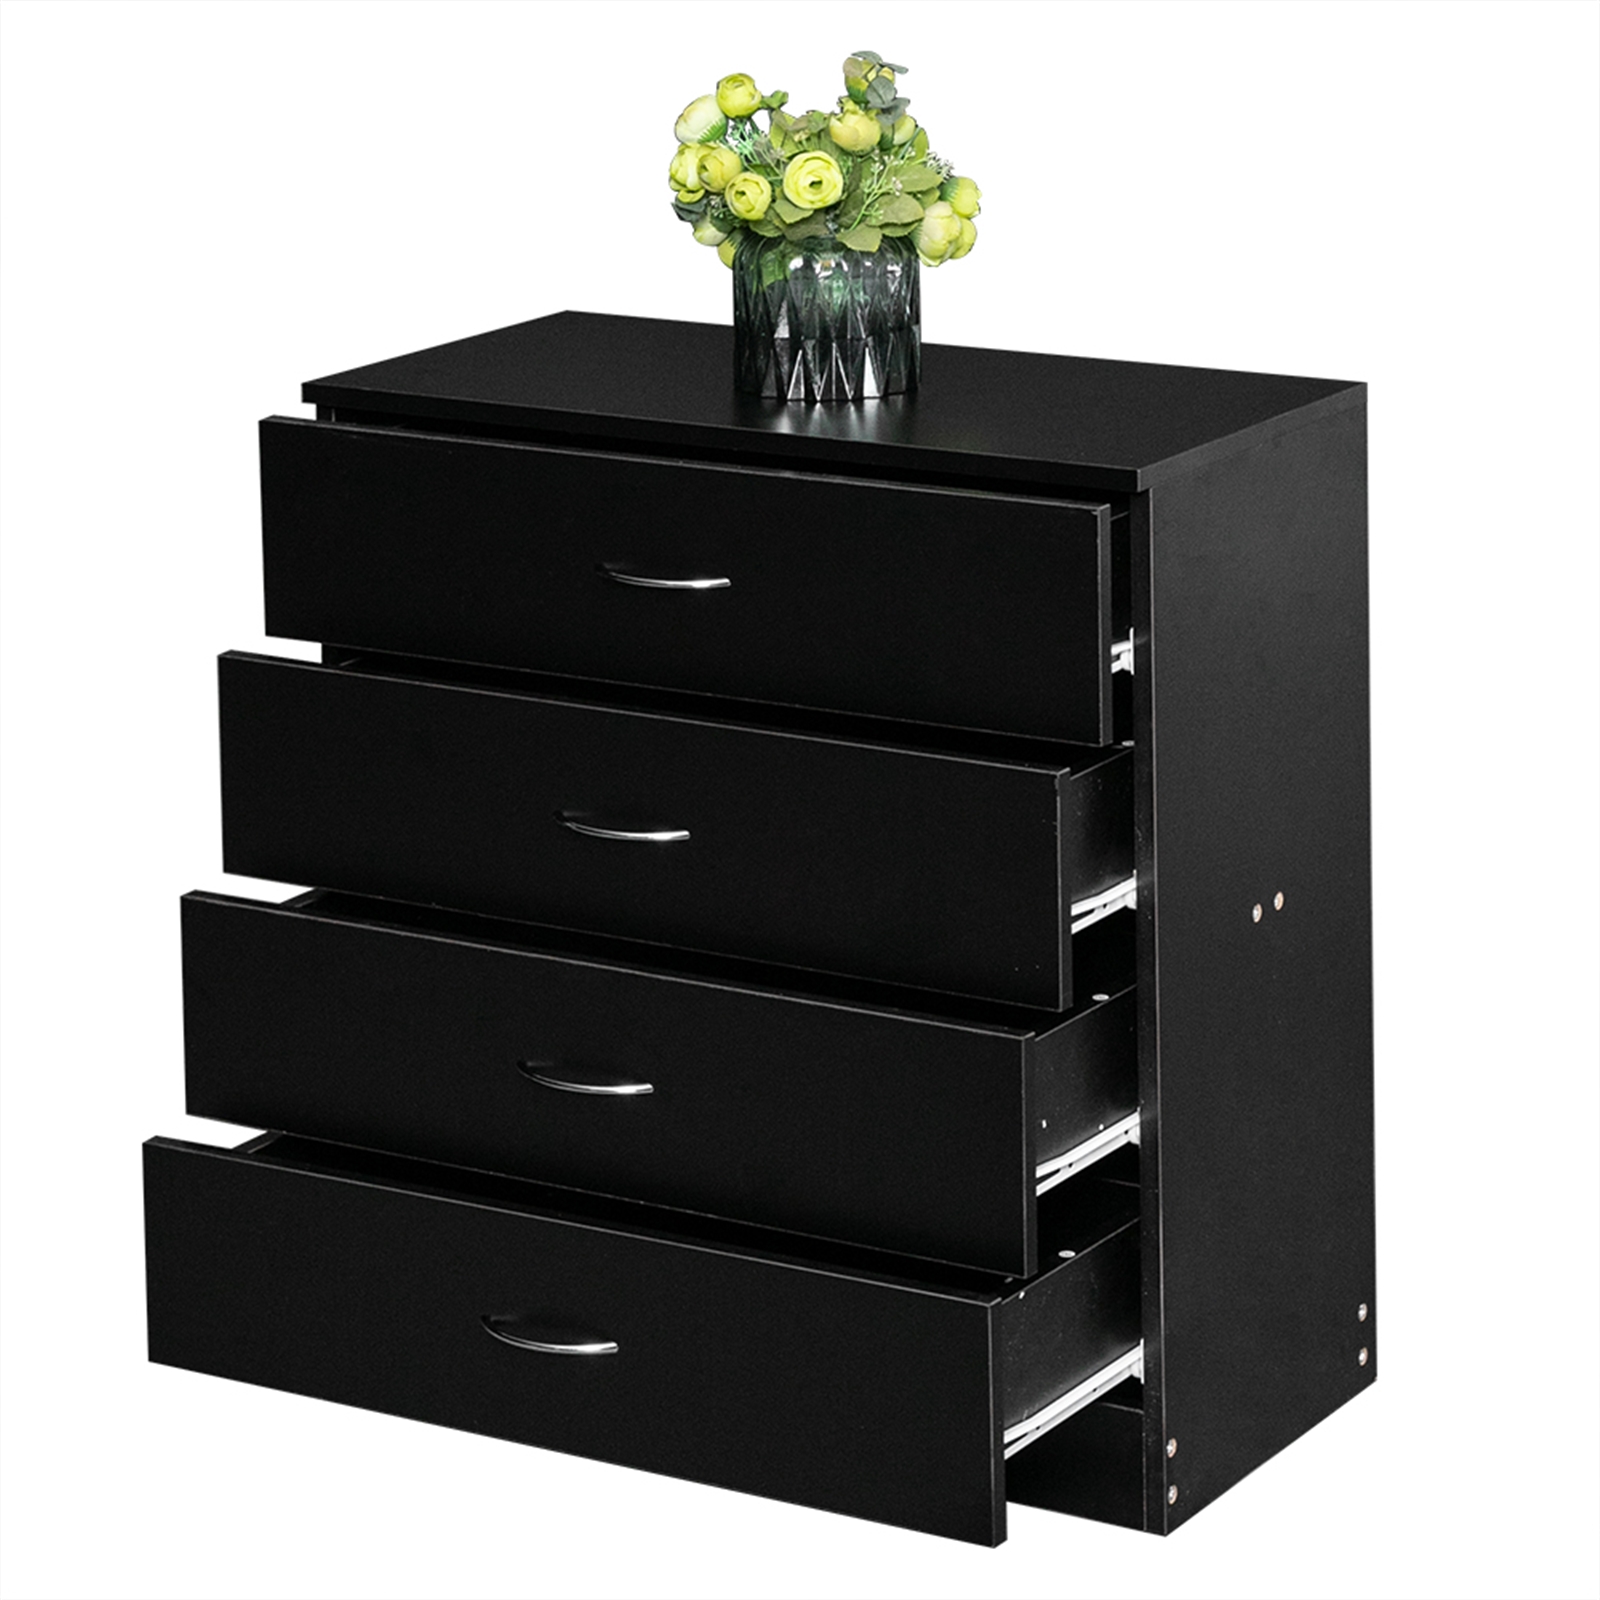 SYNGAR Modern Dresser Cabinet, Wooden 4-Drawer Dresser with Handles, Simple Home Storage Furniture of Drawers for Closet, Black Kids Storage Chest, Bedside Table of Bedroom for Clothes Cosmetic, D8780 - image 1 of 7